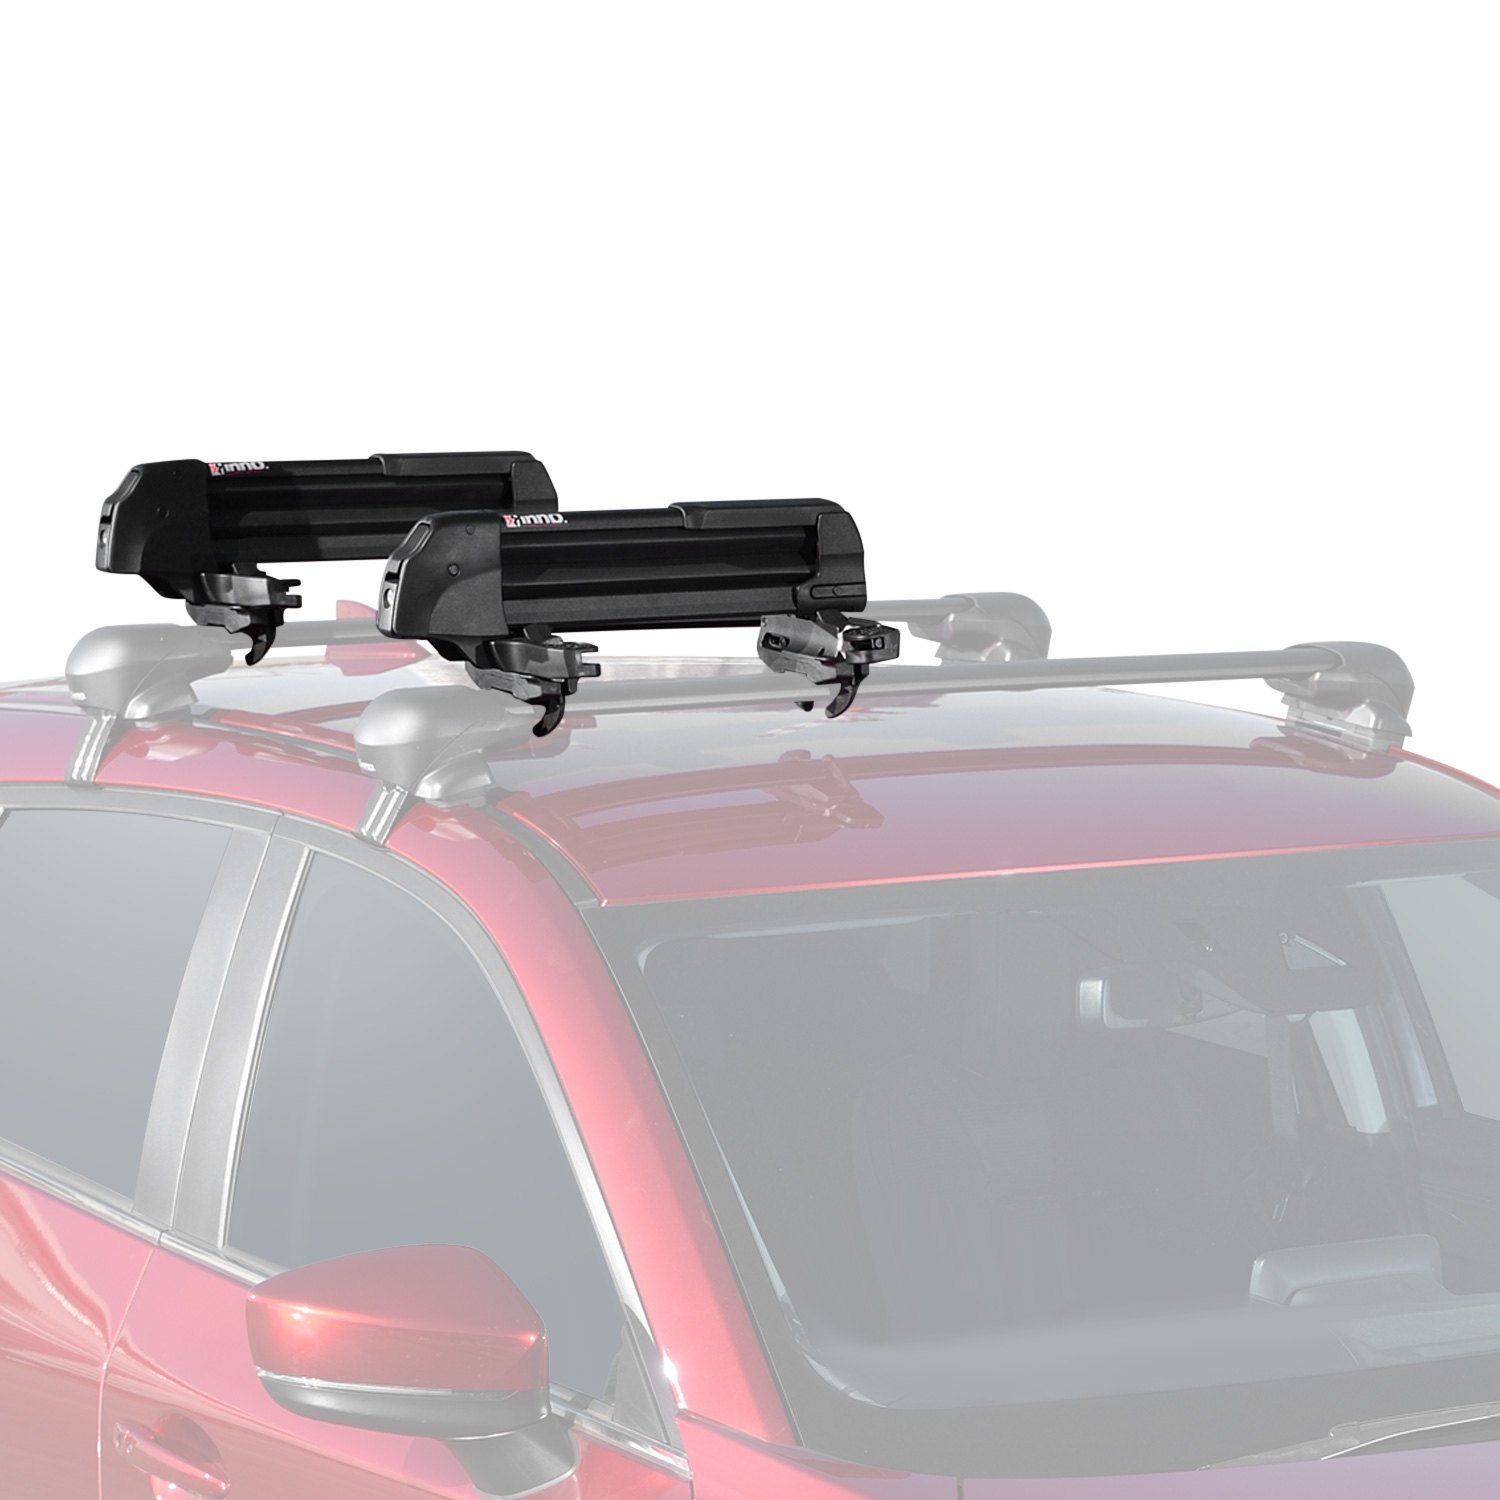 10 Best Ski, Snowboard Roof Racks Of 2021 For Your Winter Trips